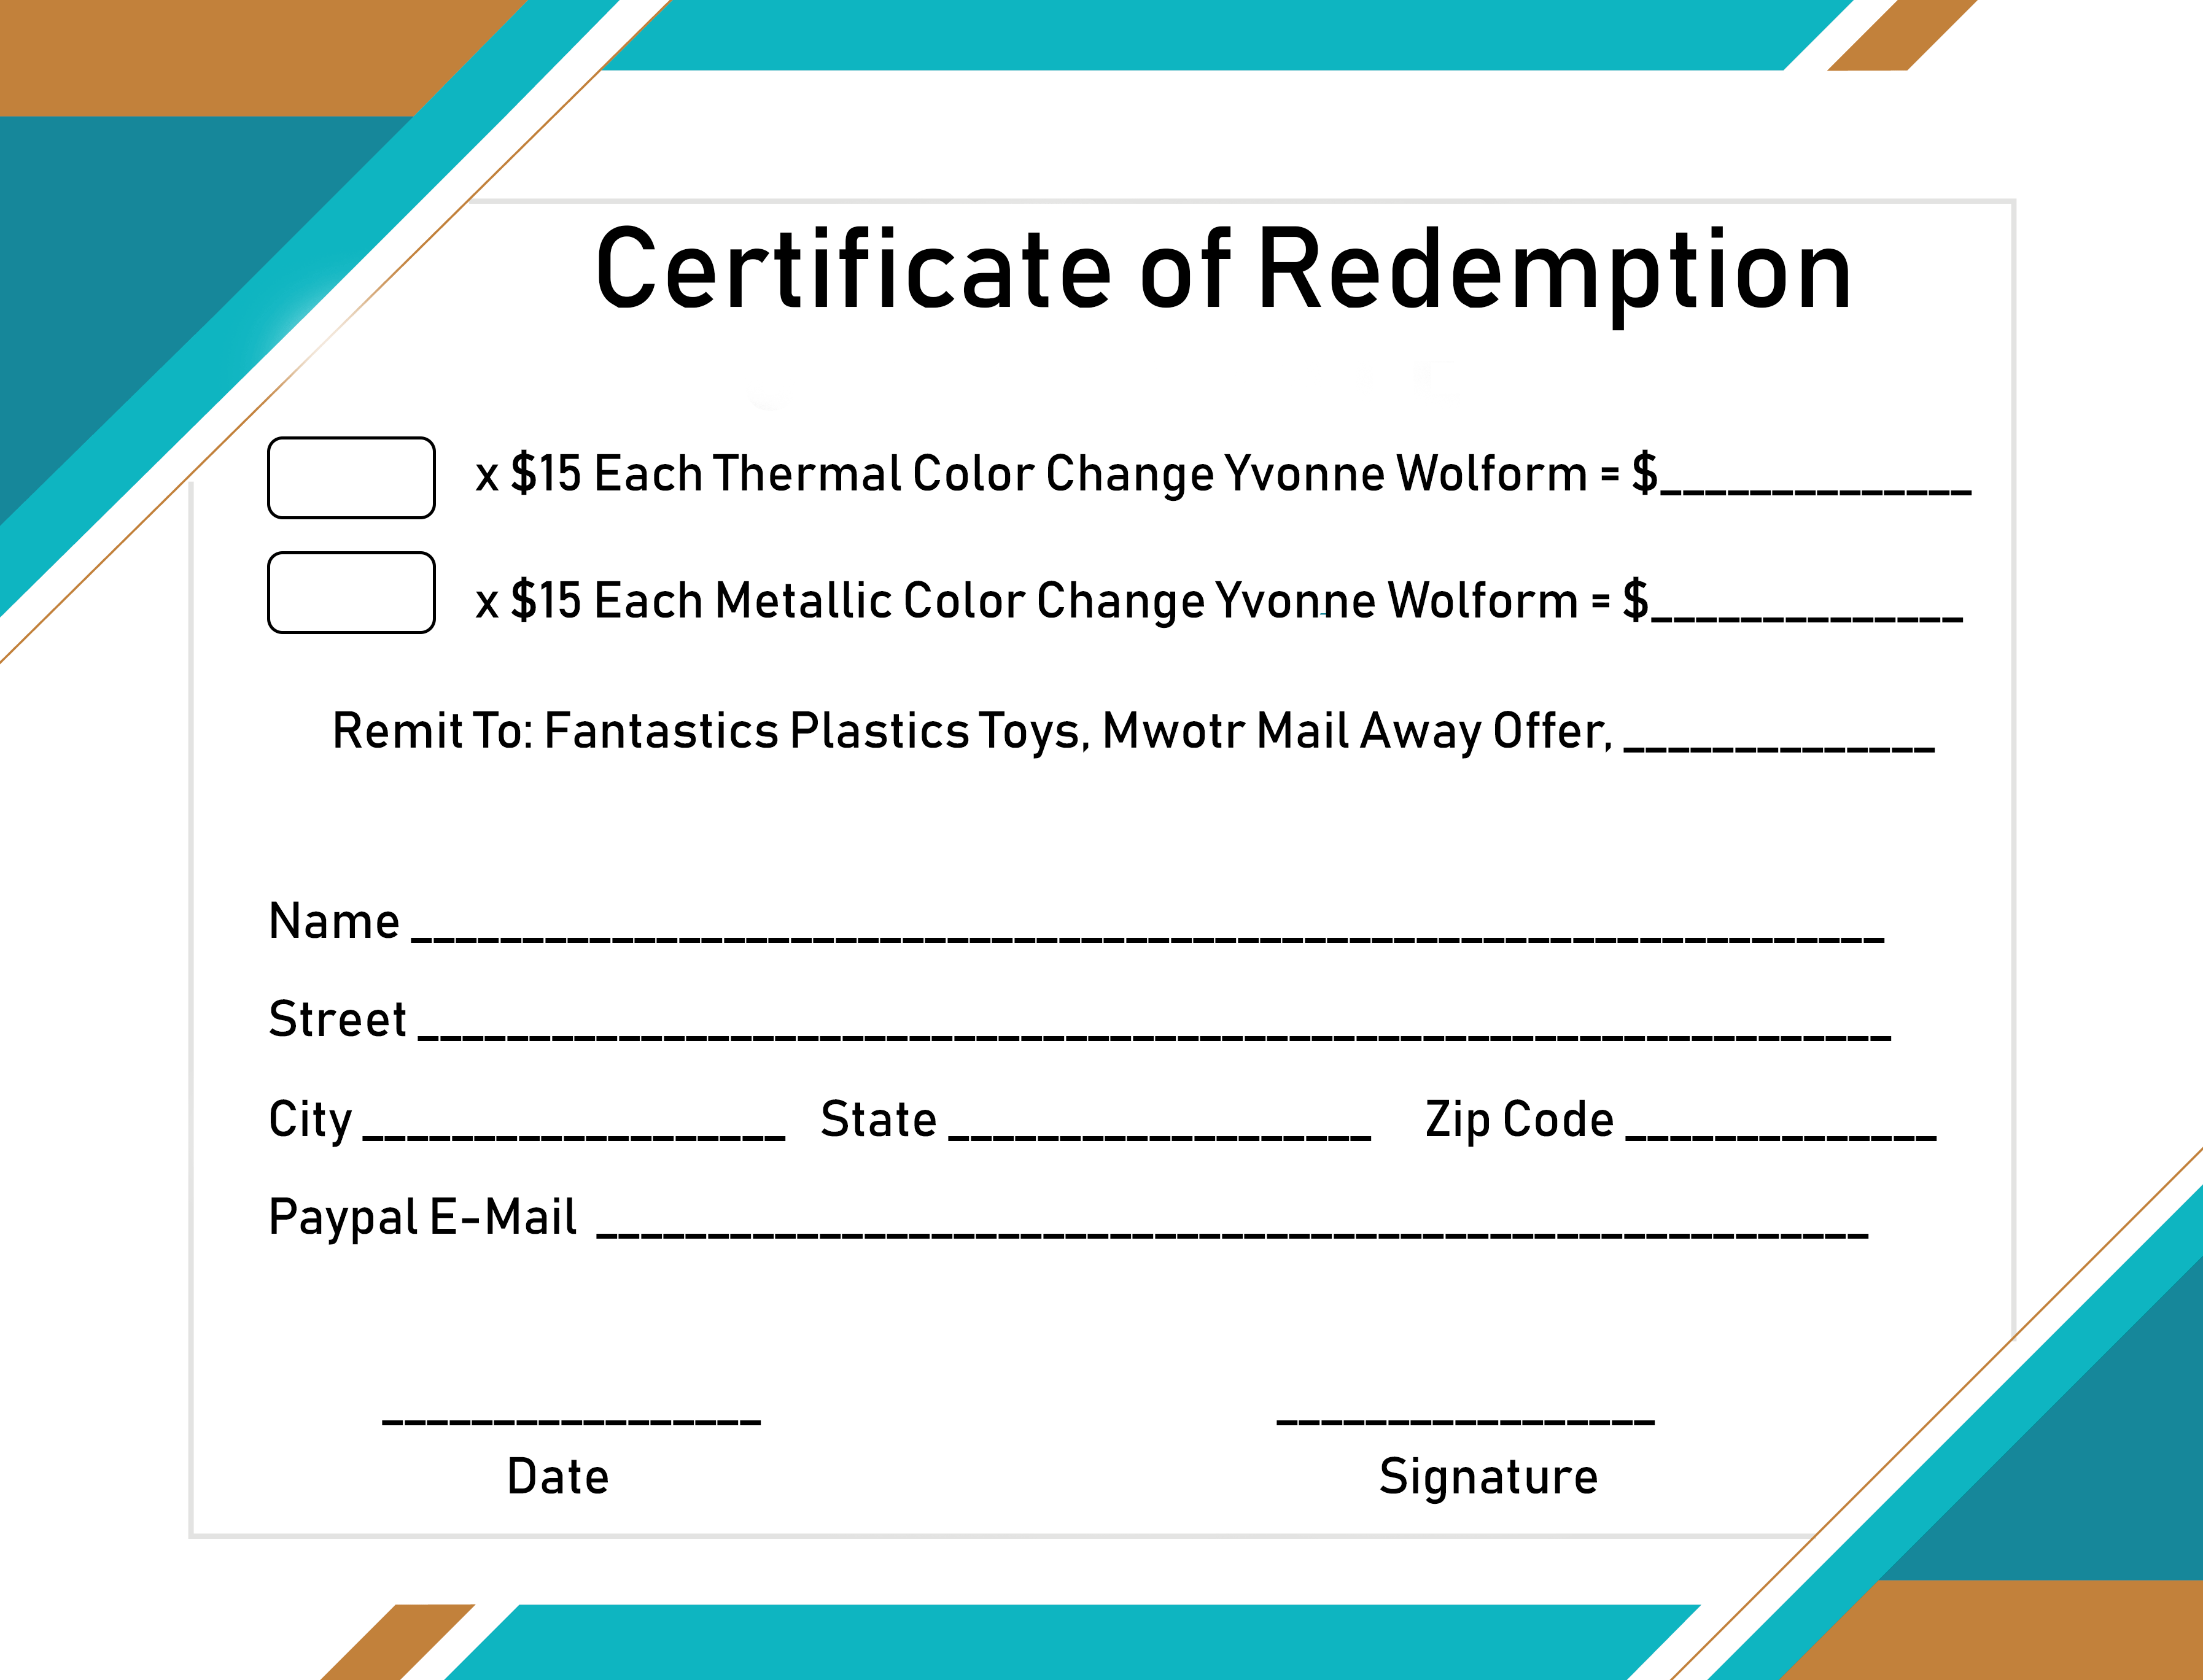 Certificate of Redemption Form